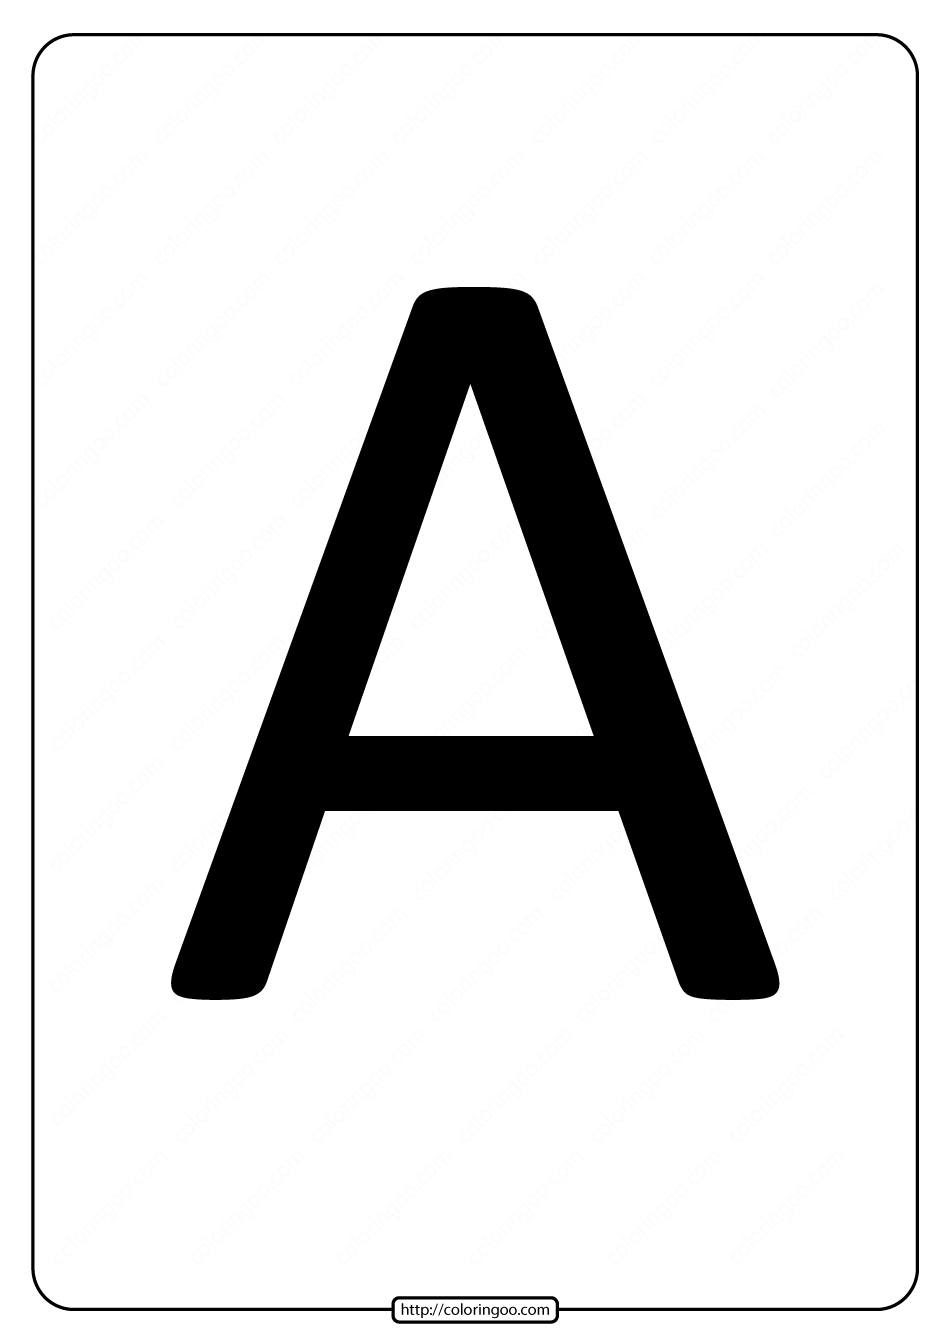 Printable A4 Size Uppercase Letters A Worksheet